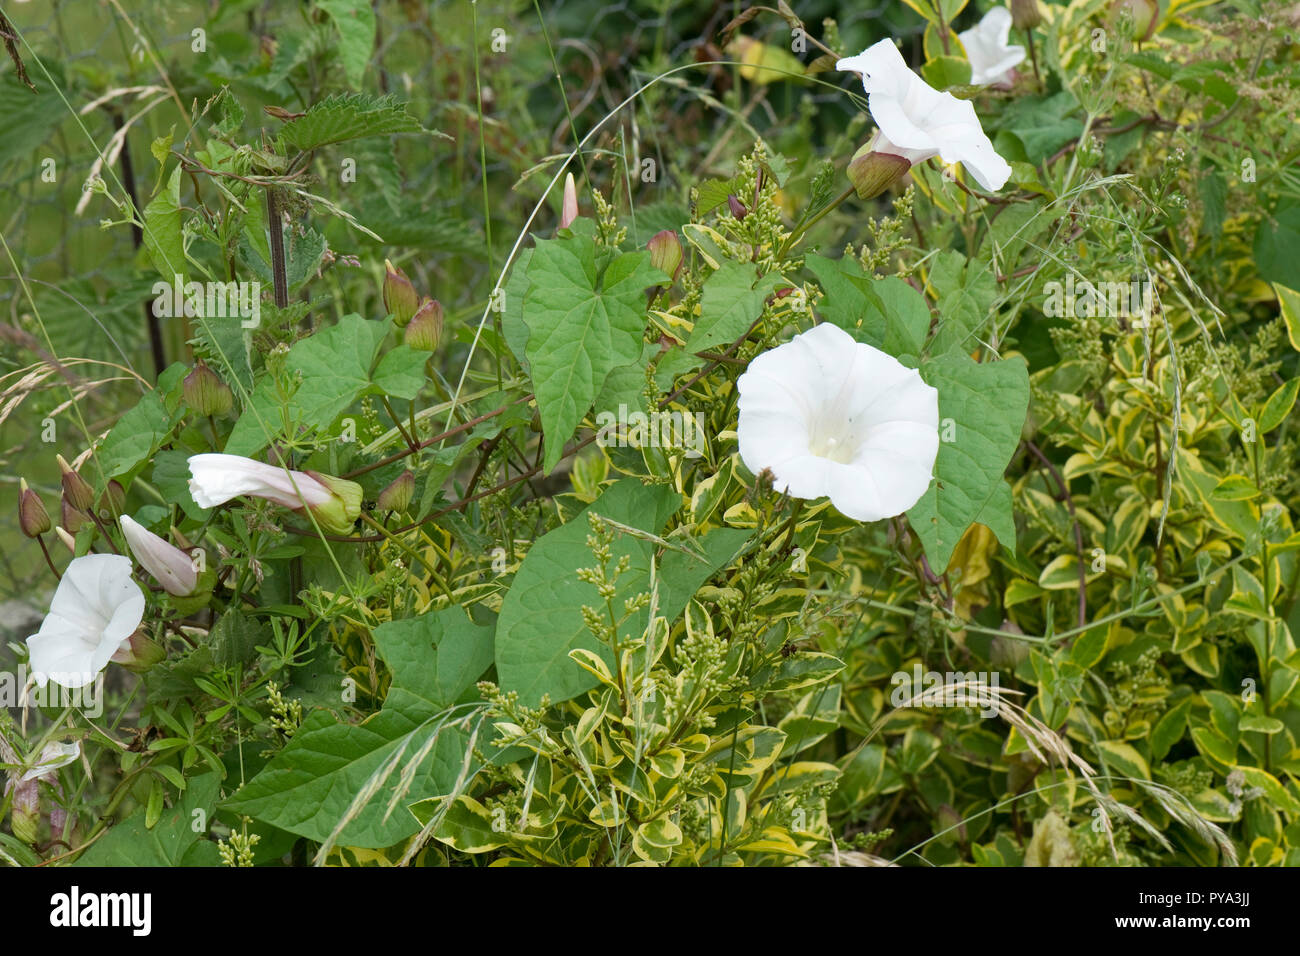 Greater or hedge bindweed, Calystegia sepium, creeping weed with white flowers and leaves growing through a privet hedge, June Stock Photo